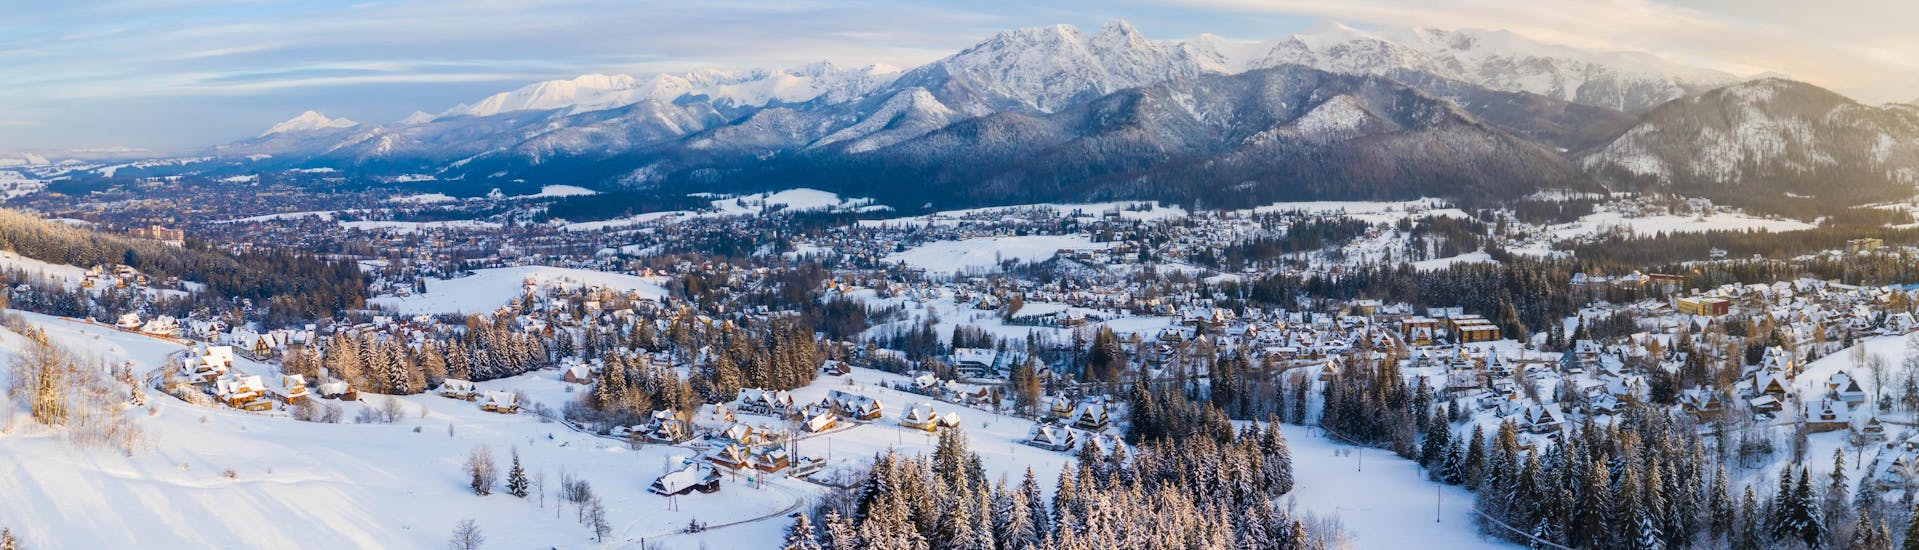 View of the snowy landscape of the village of Zakopane in the Tatra mountains, where local ski schools offer their ski lessons.